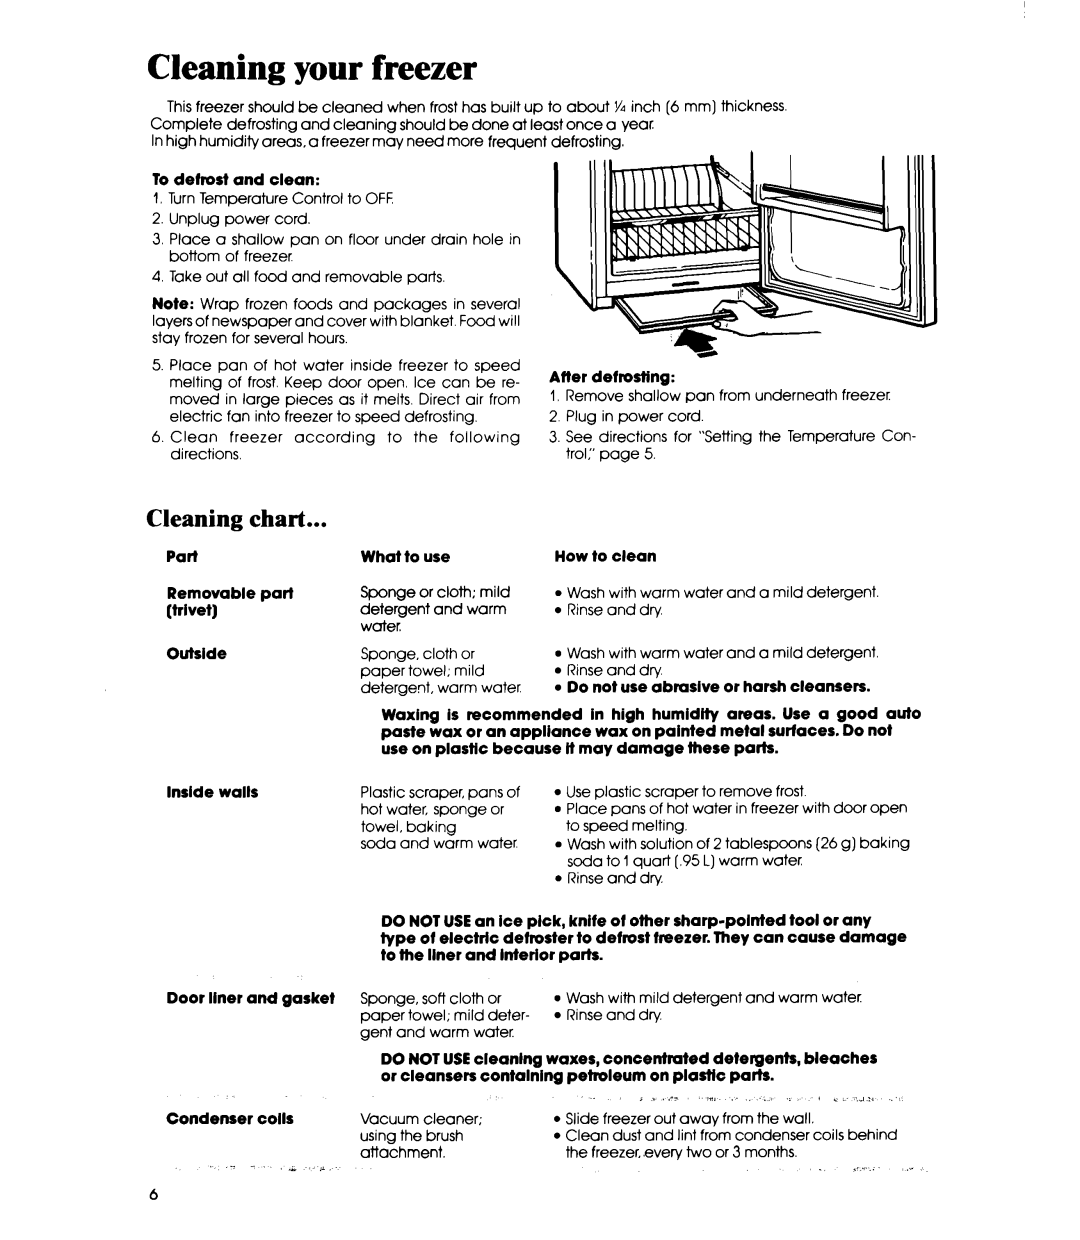 Whirlpool EVllOC manual Cleaning your freezer, Cleaning chart 